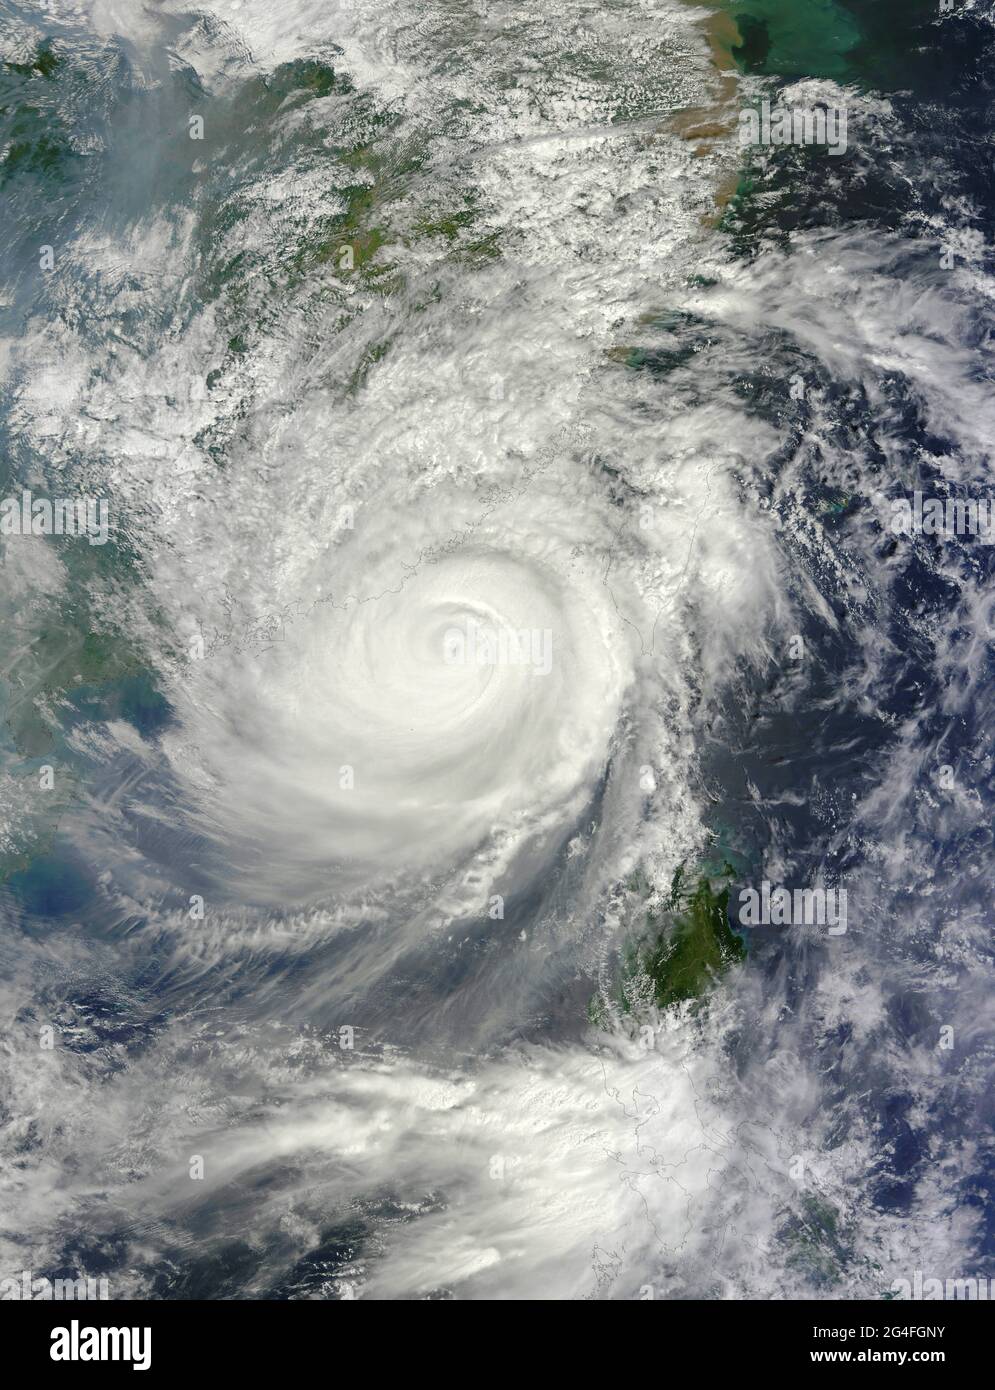 CHINA - 24 September 2013 - This weekend, the most powerful tropical cyclone of 2013 passed between Taiwan and the Philippines, then slammed into the Stock Photo